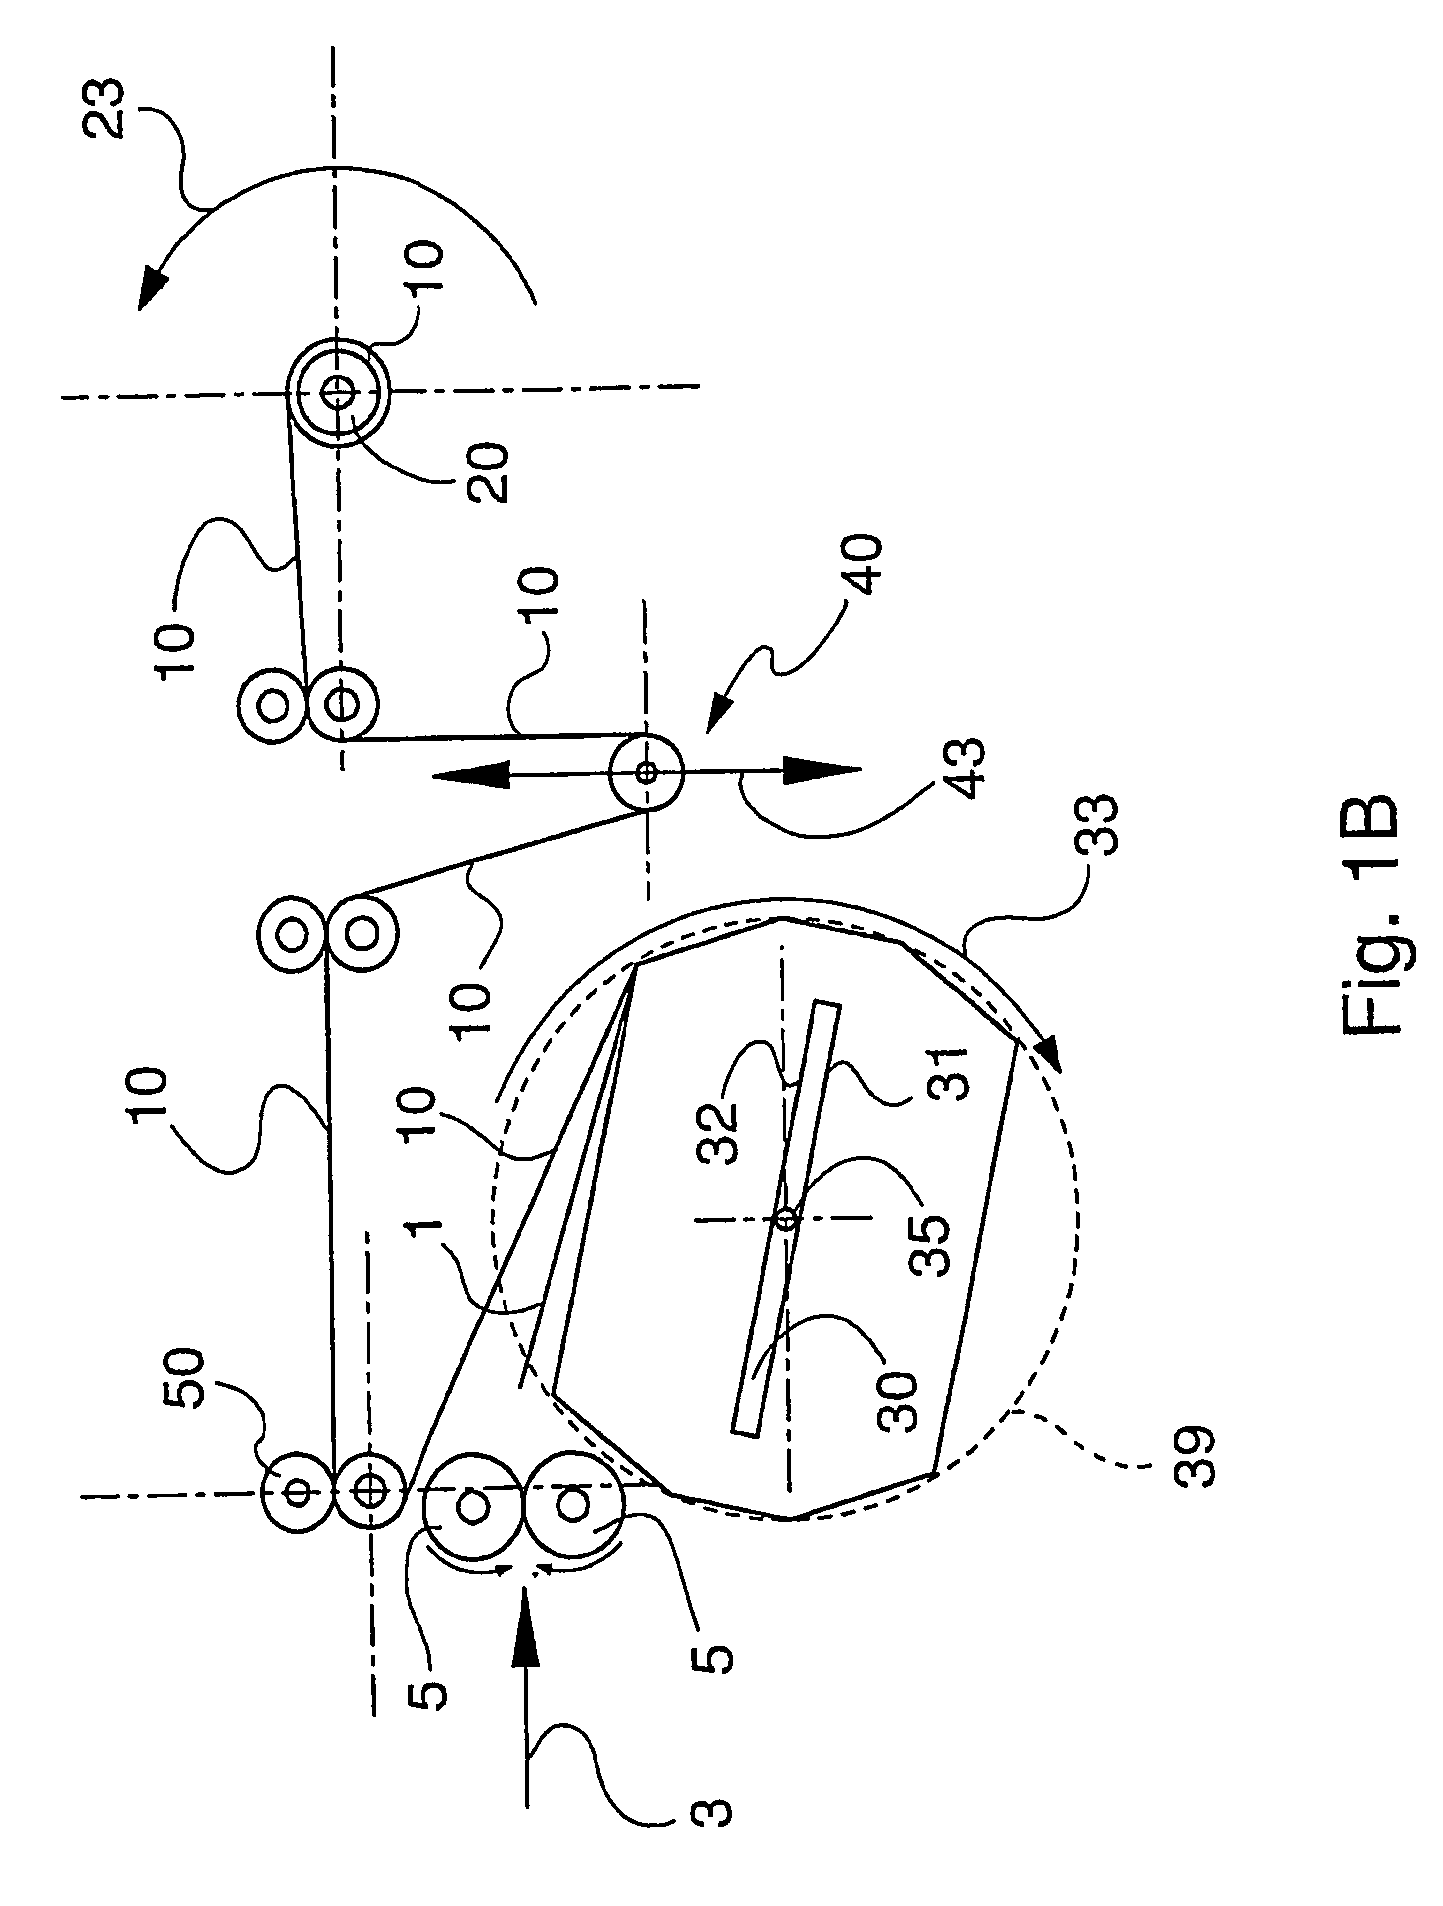 Device and method for storing and/or dispensing rigid or flexible substantially planar items